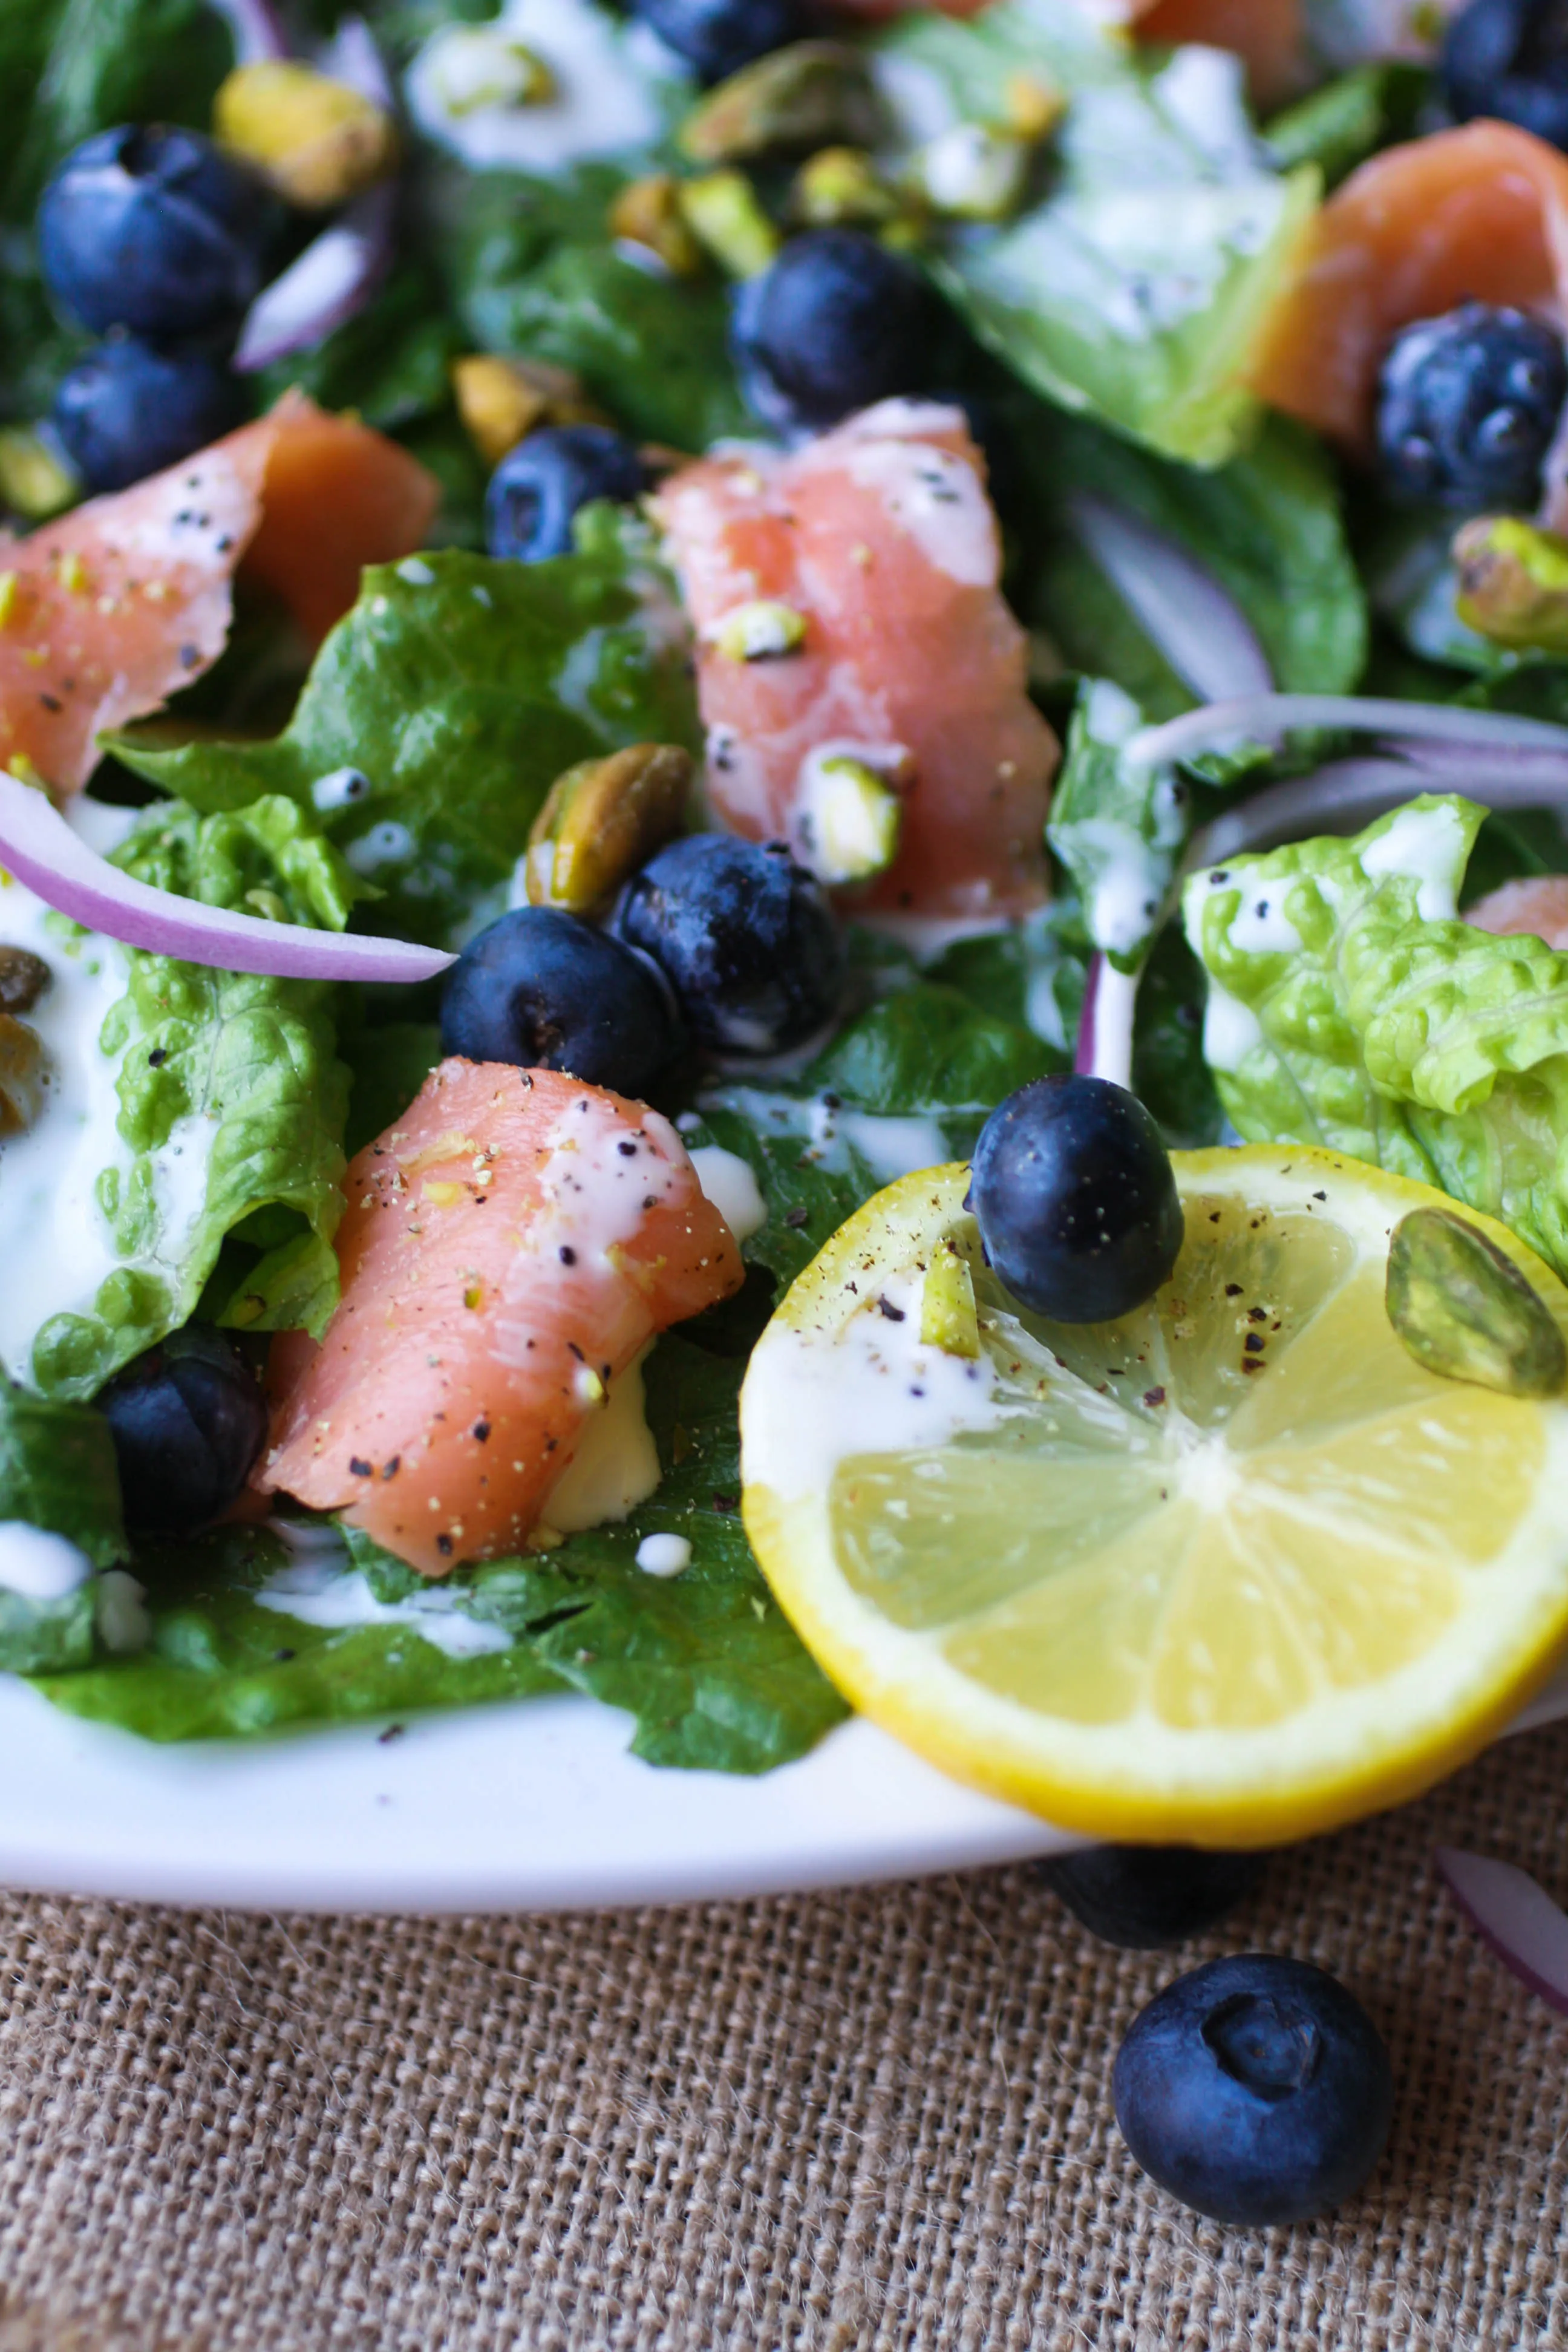 Smoked Salmon Salad with Blueberries and Lemon Poppy Seed Dressing makes wonderful summer meal. You won't even have to turn on the oven!